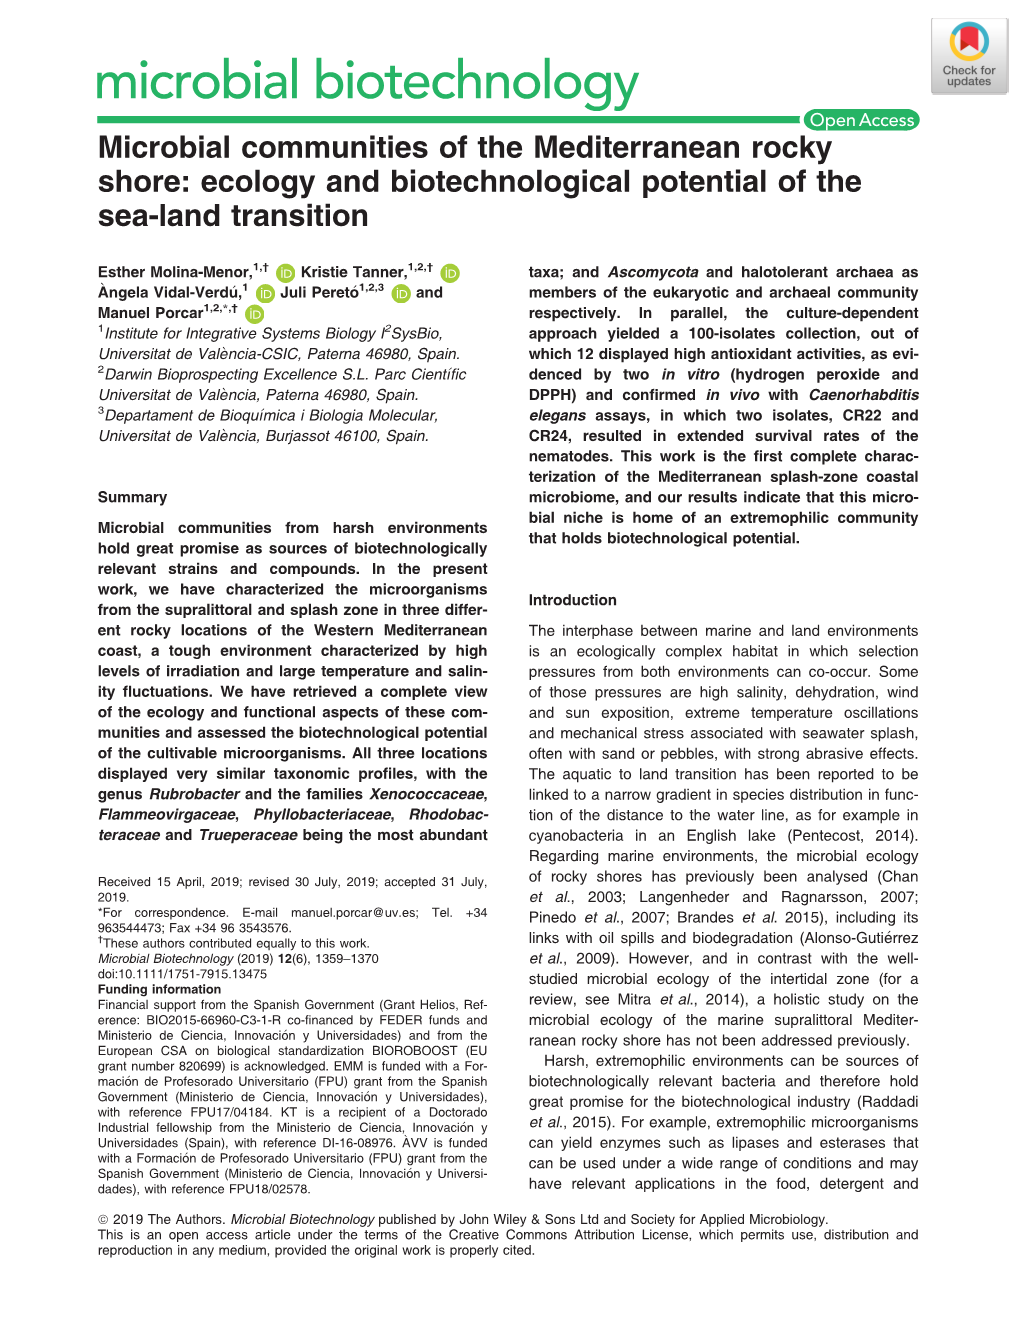 Microbial Communities of the Mediterranean Rocky Shore: Ecology and Biotechnological Potential of the Sea-Land Transition